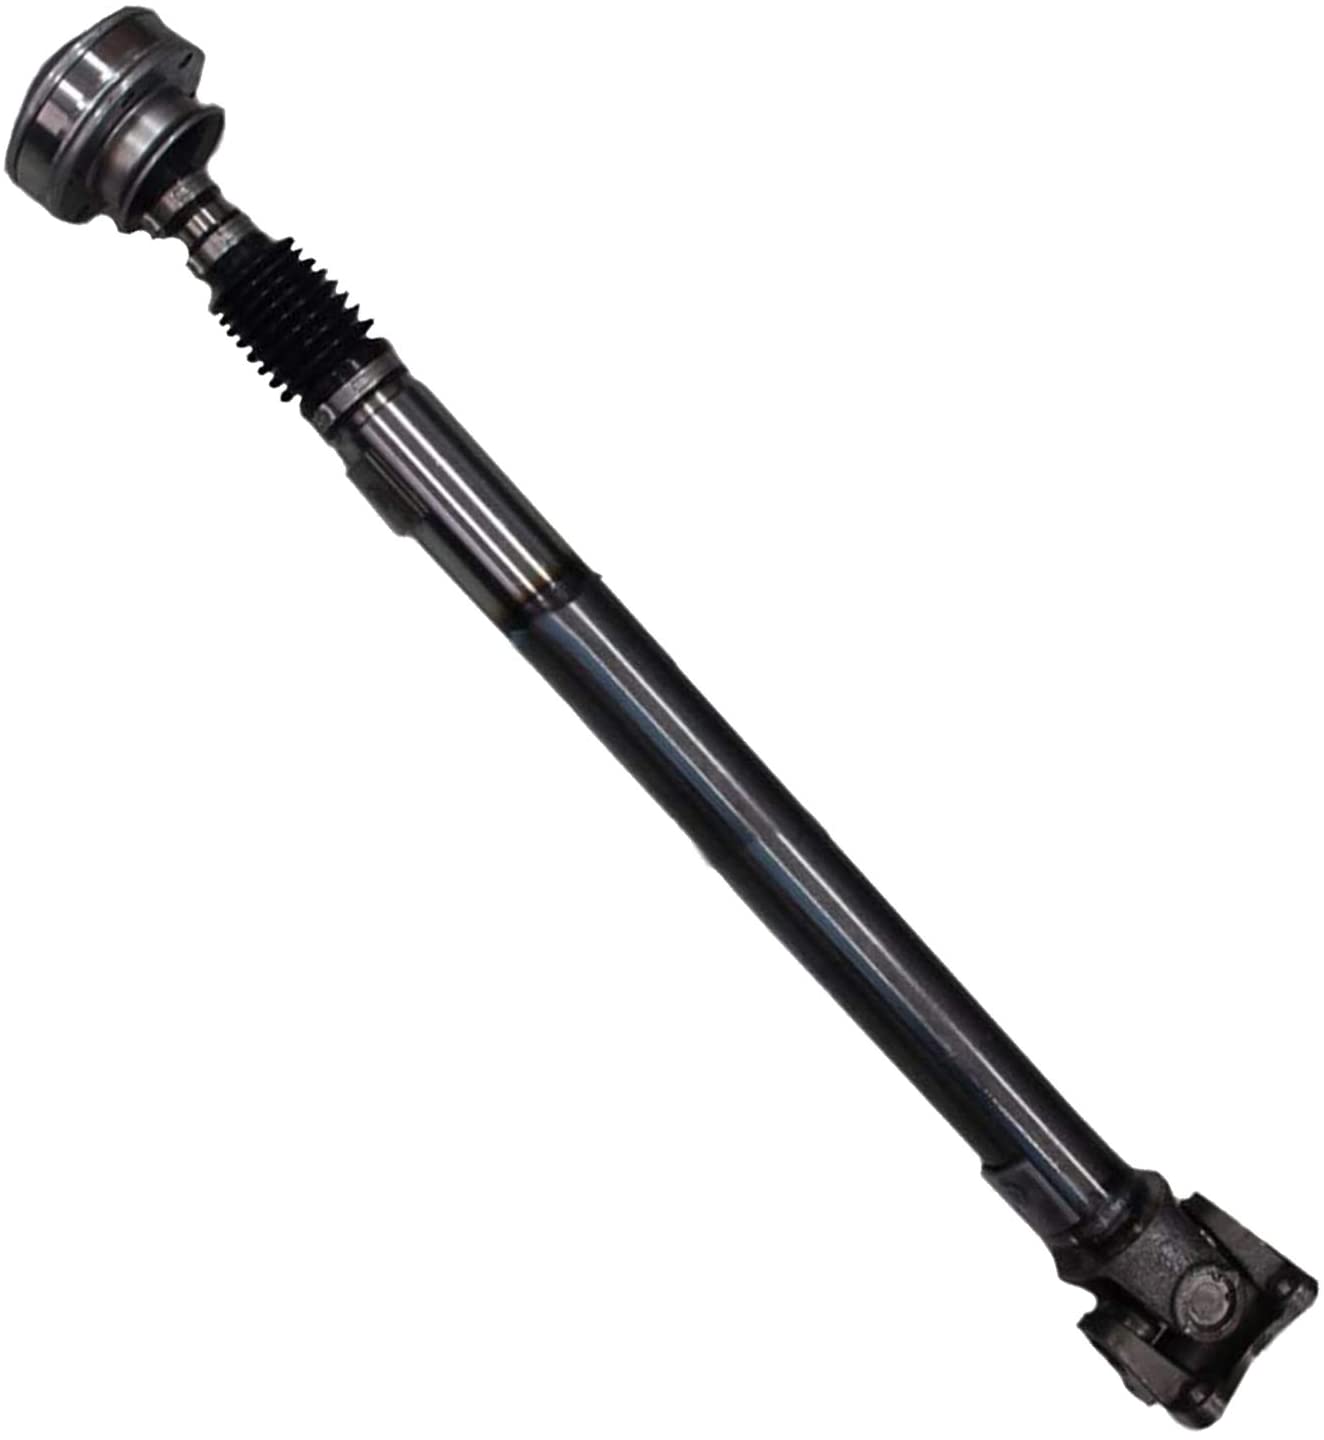 Detroit Axle 4WD Front Drive Shaft Replacement for Jeep Commander Grand  Cherokee (821mm Length)